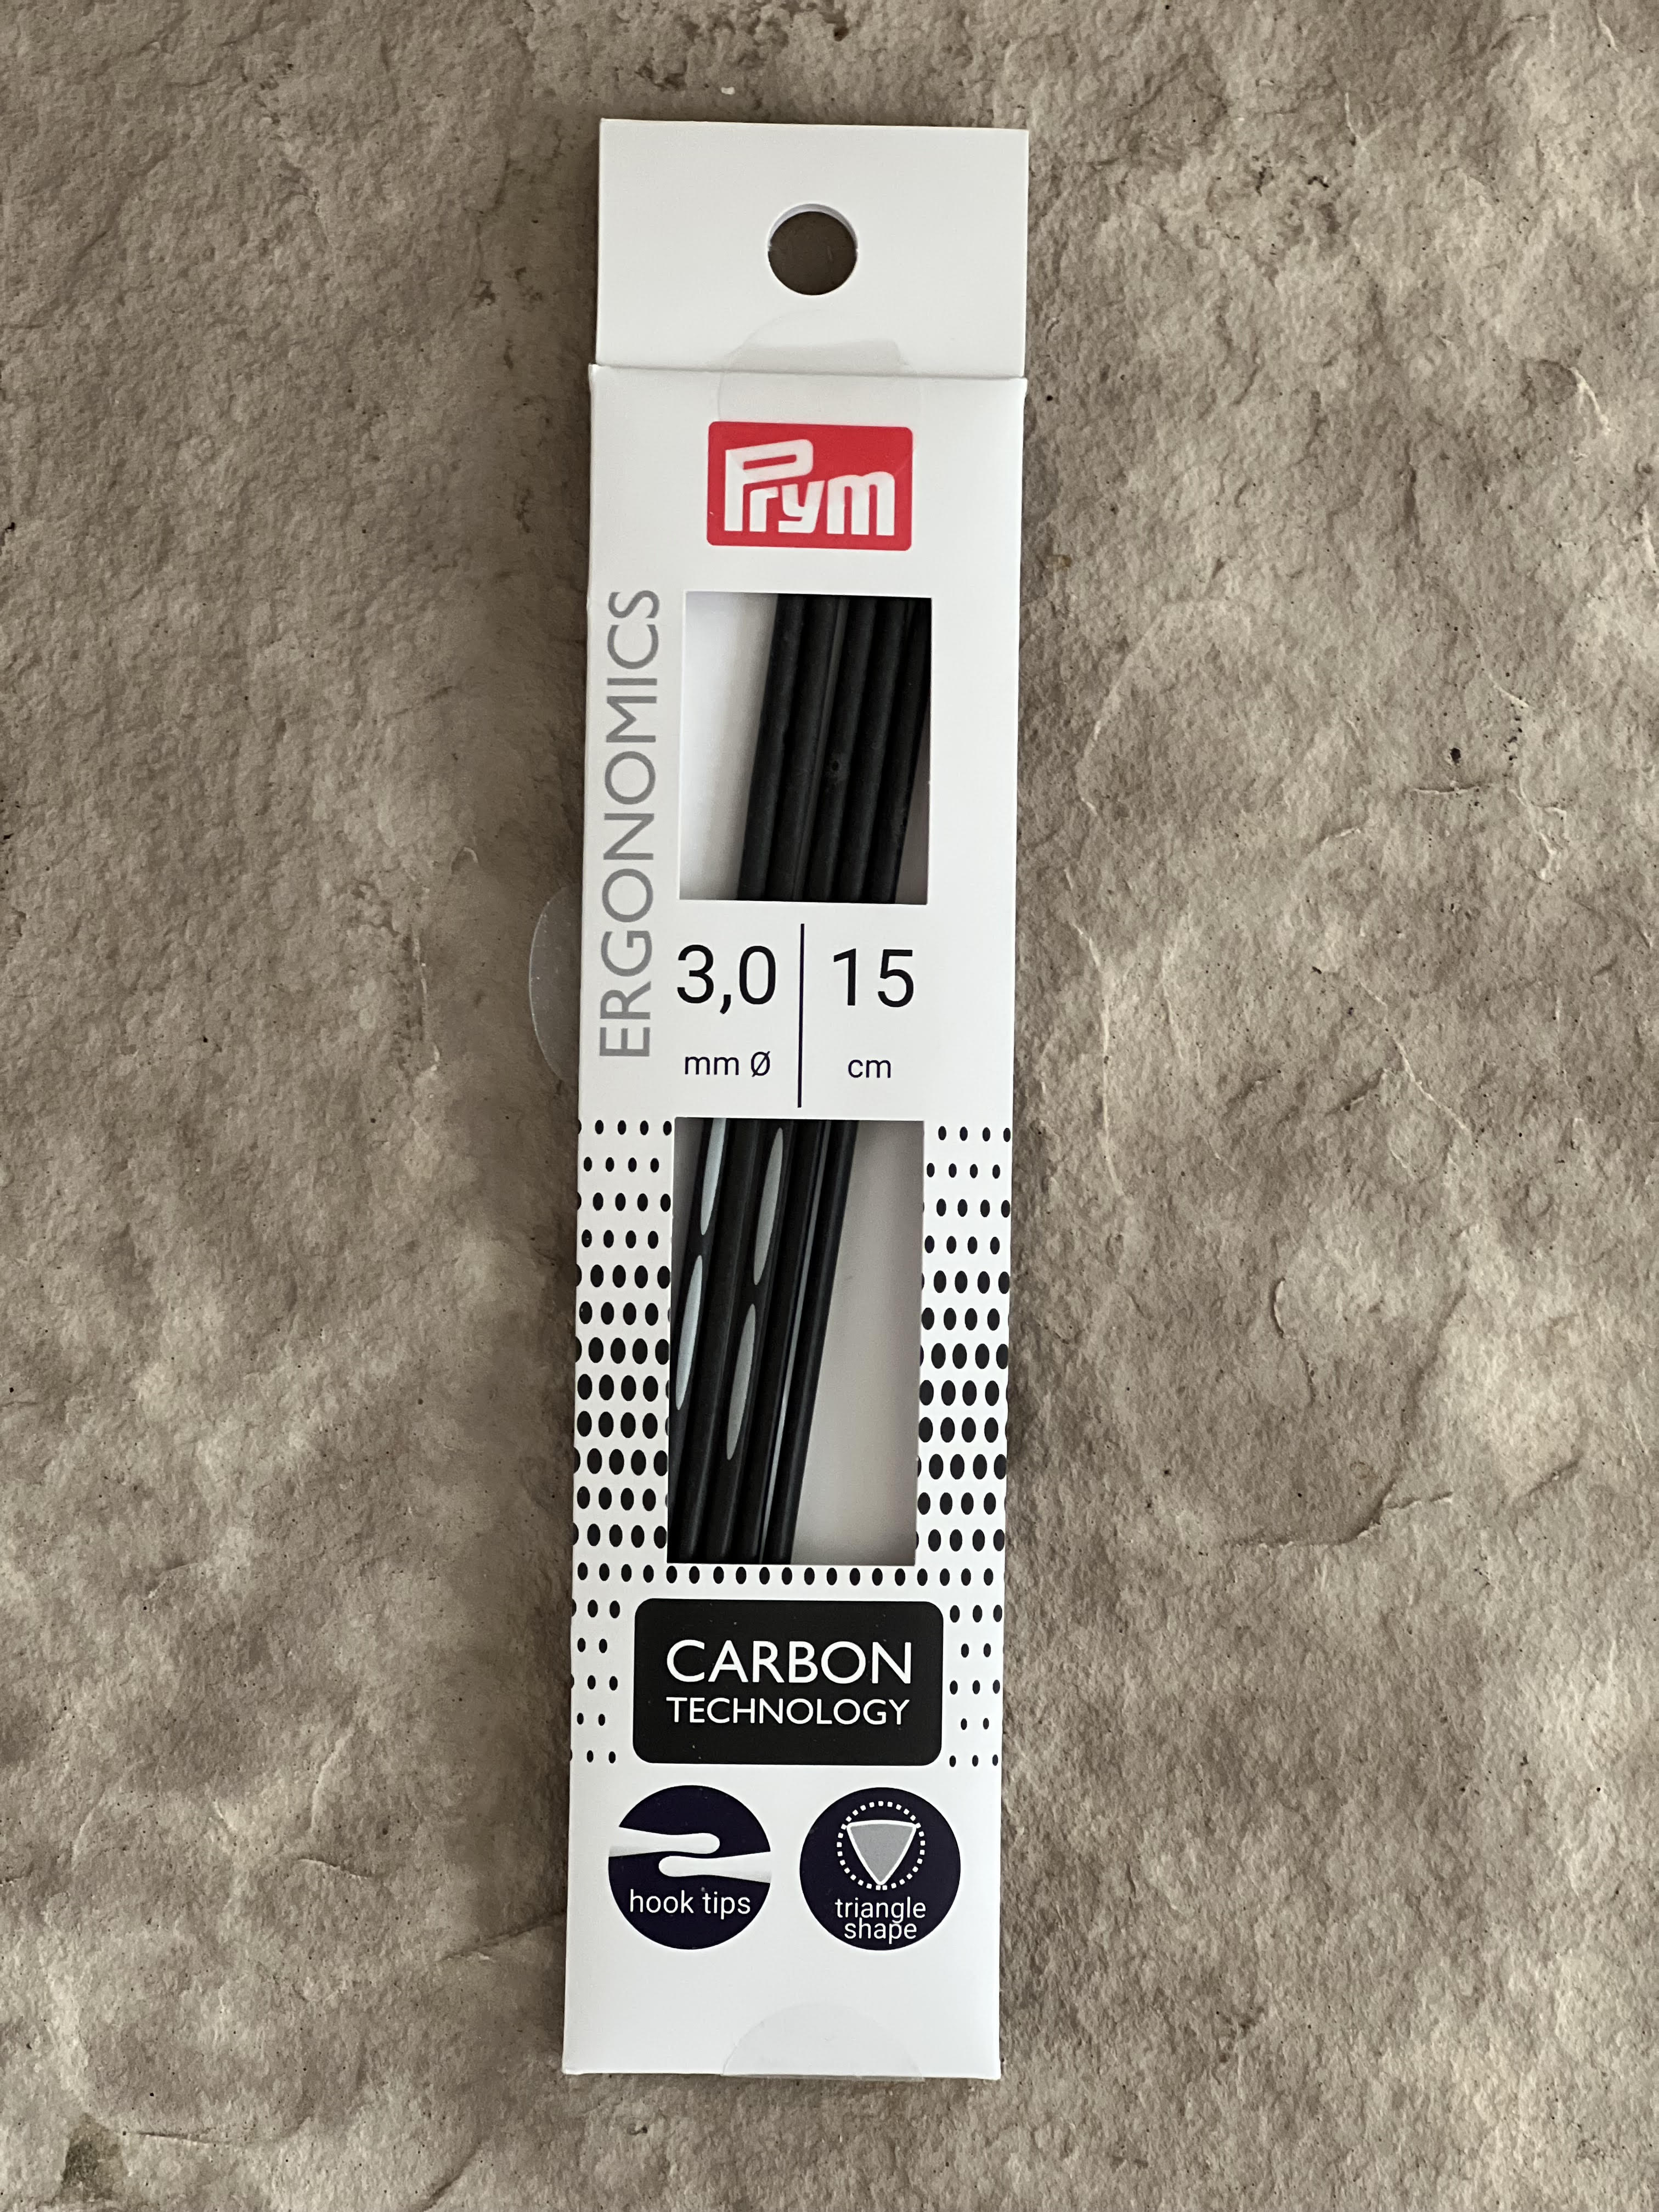 Prym 6 Double Point, US 2 (3mm) Knitting Needles, Alabaster White 5 Count